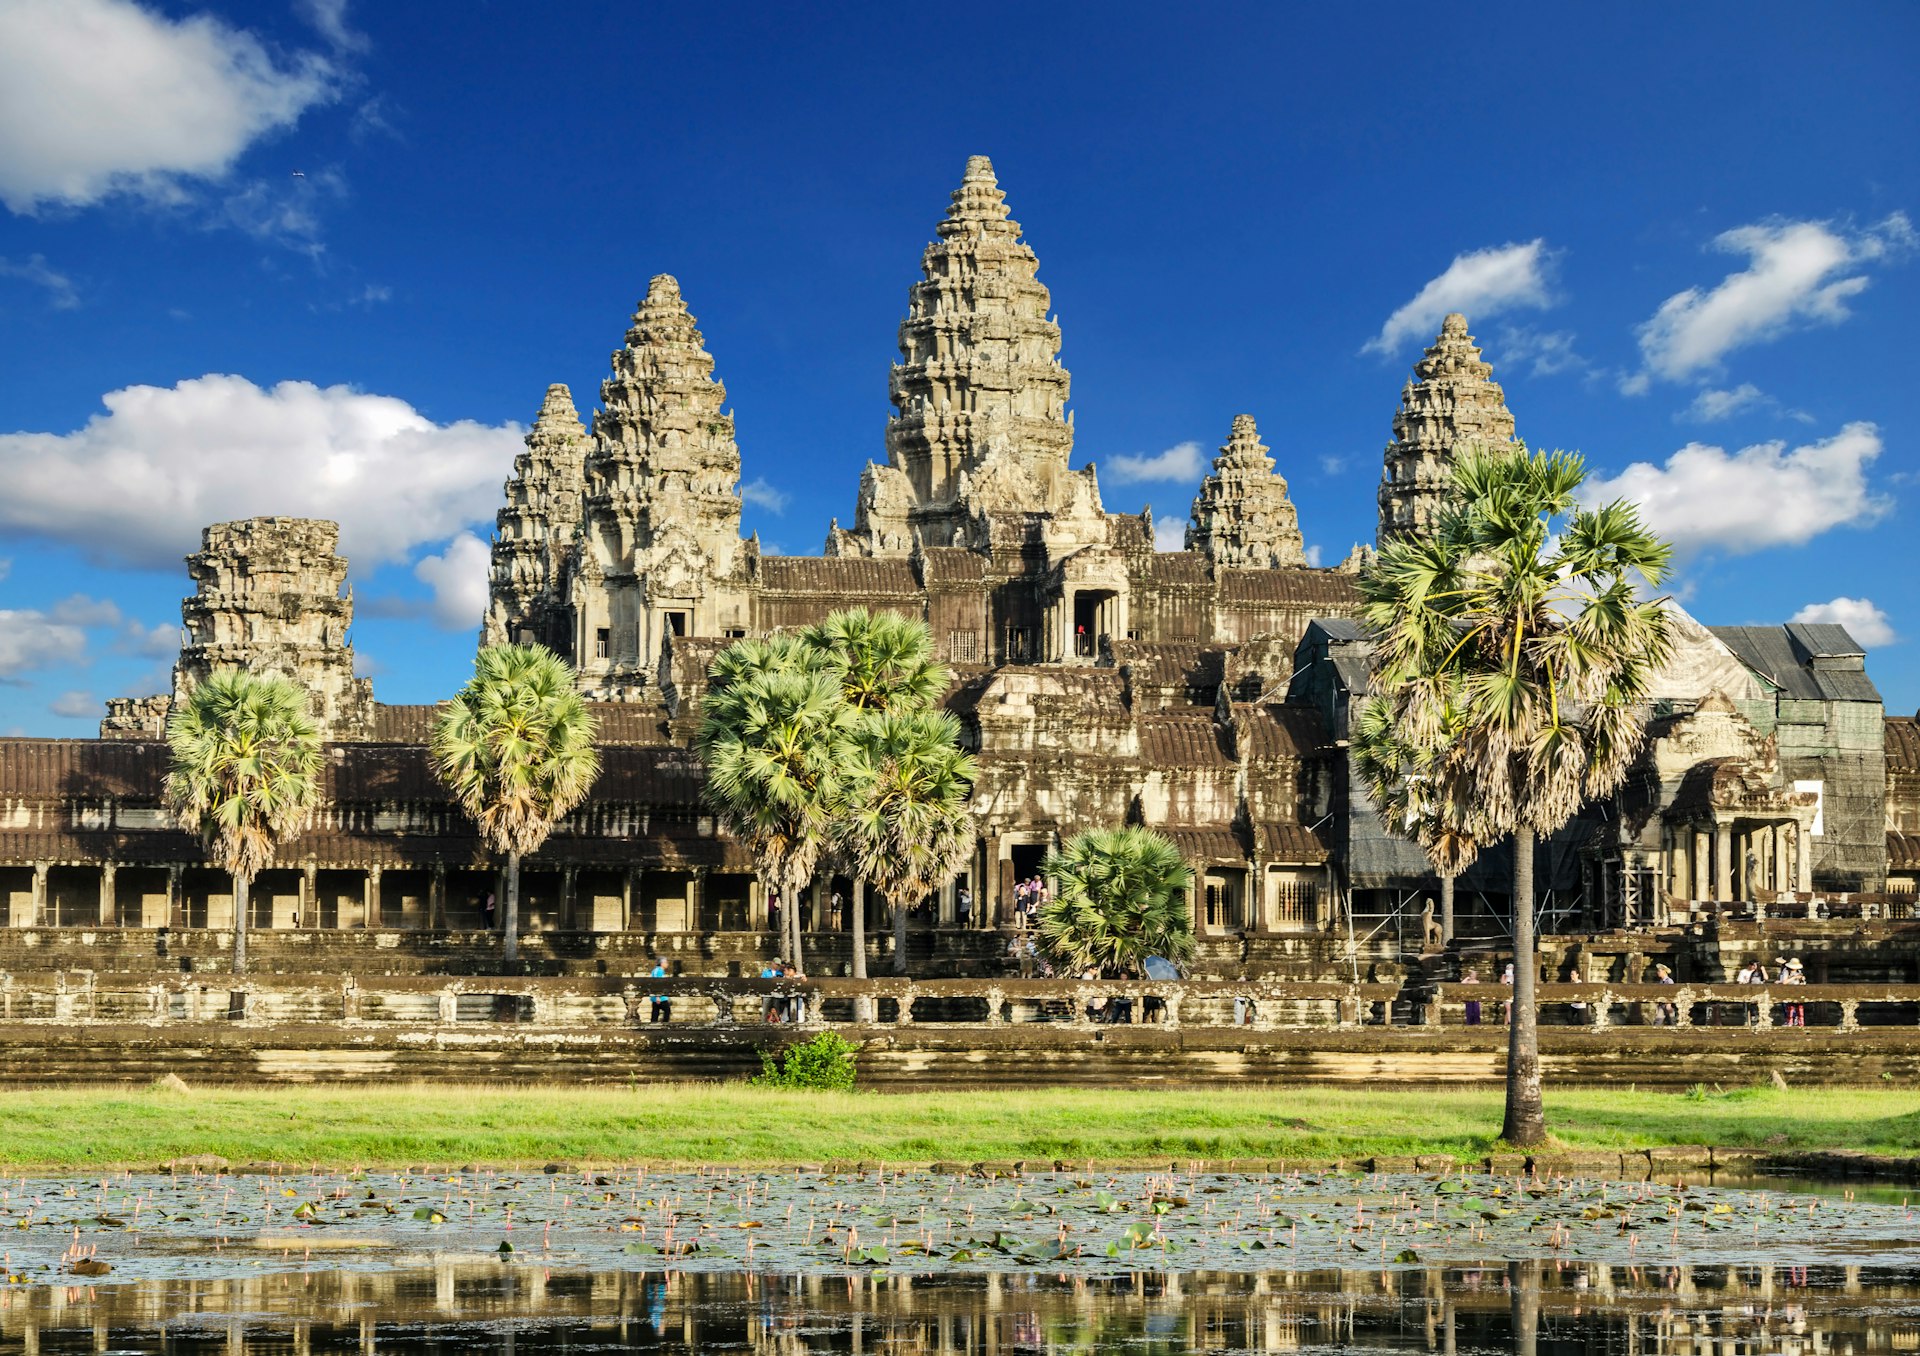 A view of Angkor Wat Temple, Cambodia. The temple is vast and ancient and is extremely popular with tourists.